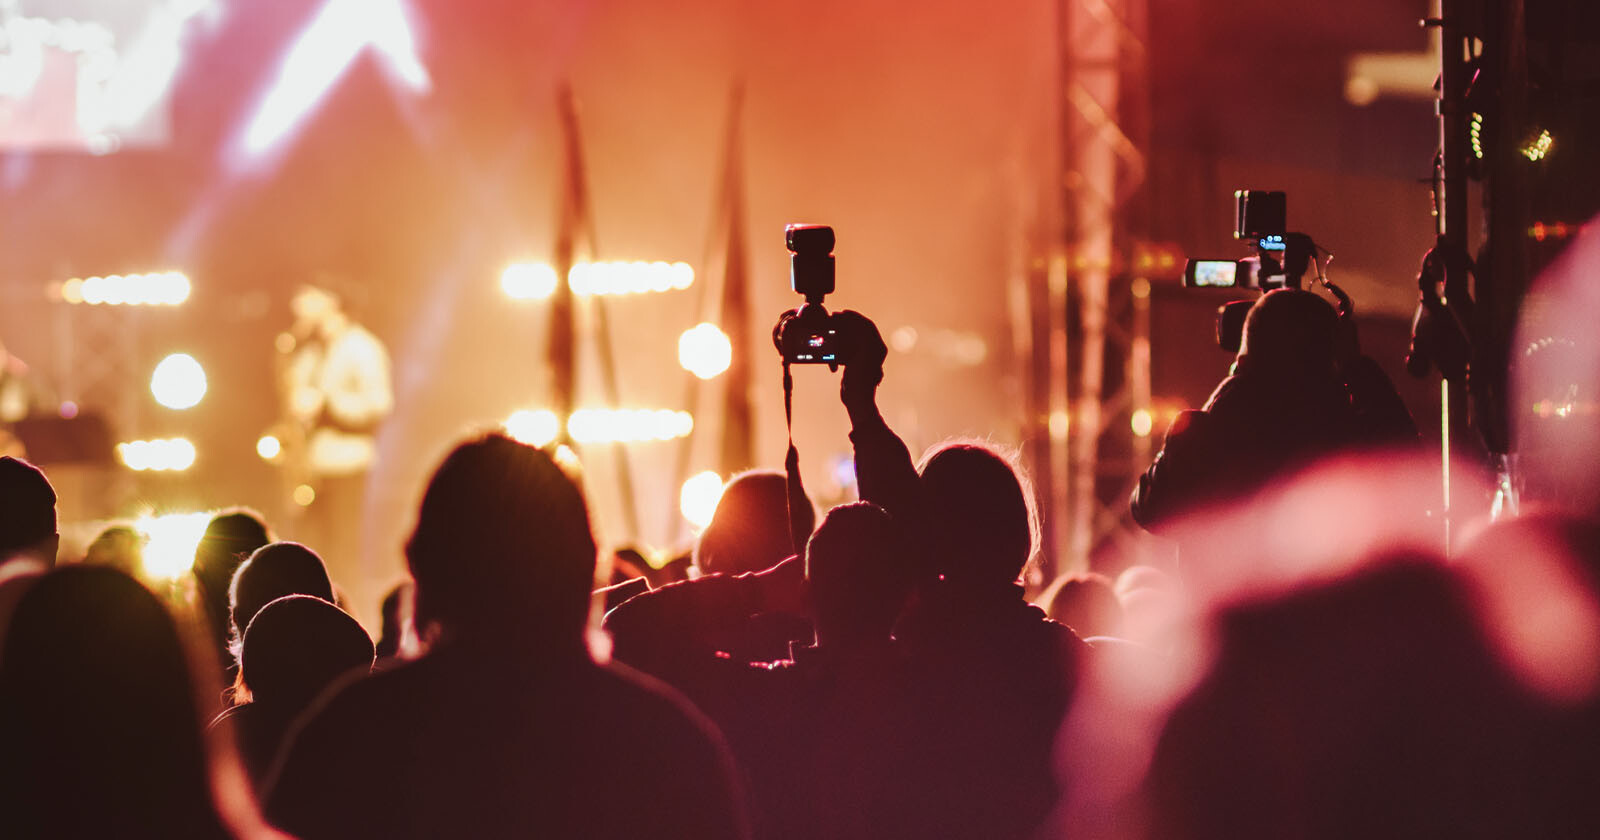 Photographer Claims He was Assualted While Covering a Concert